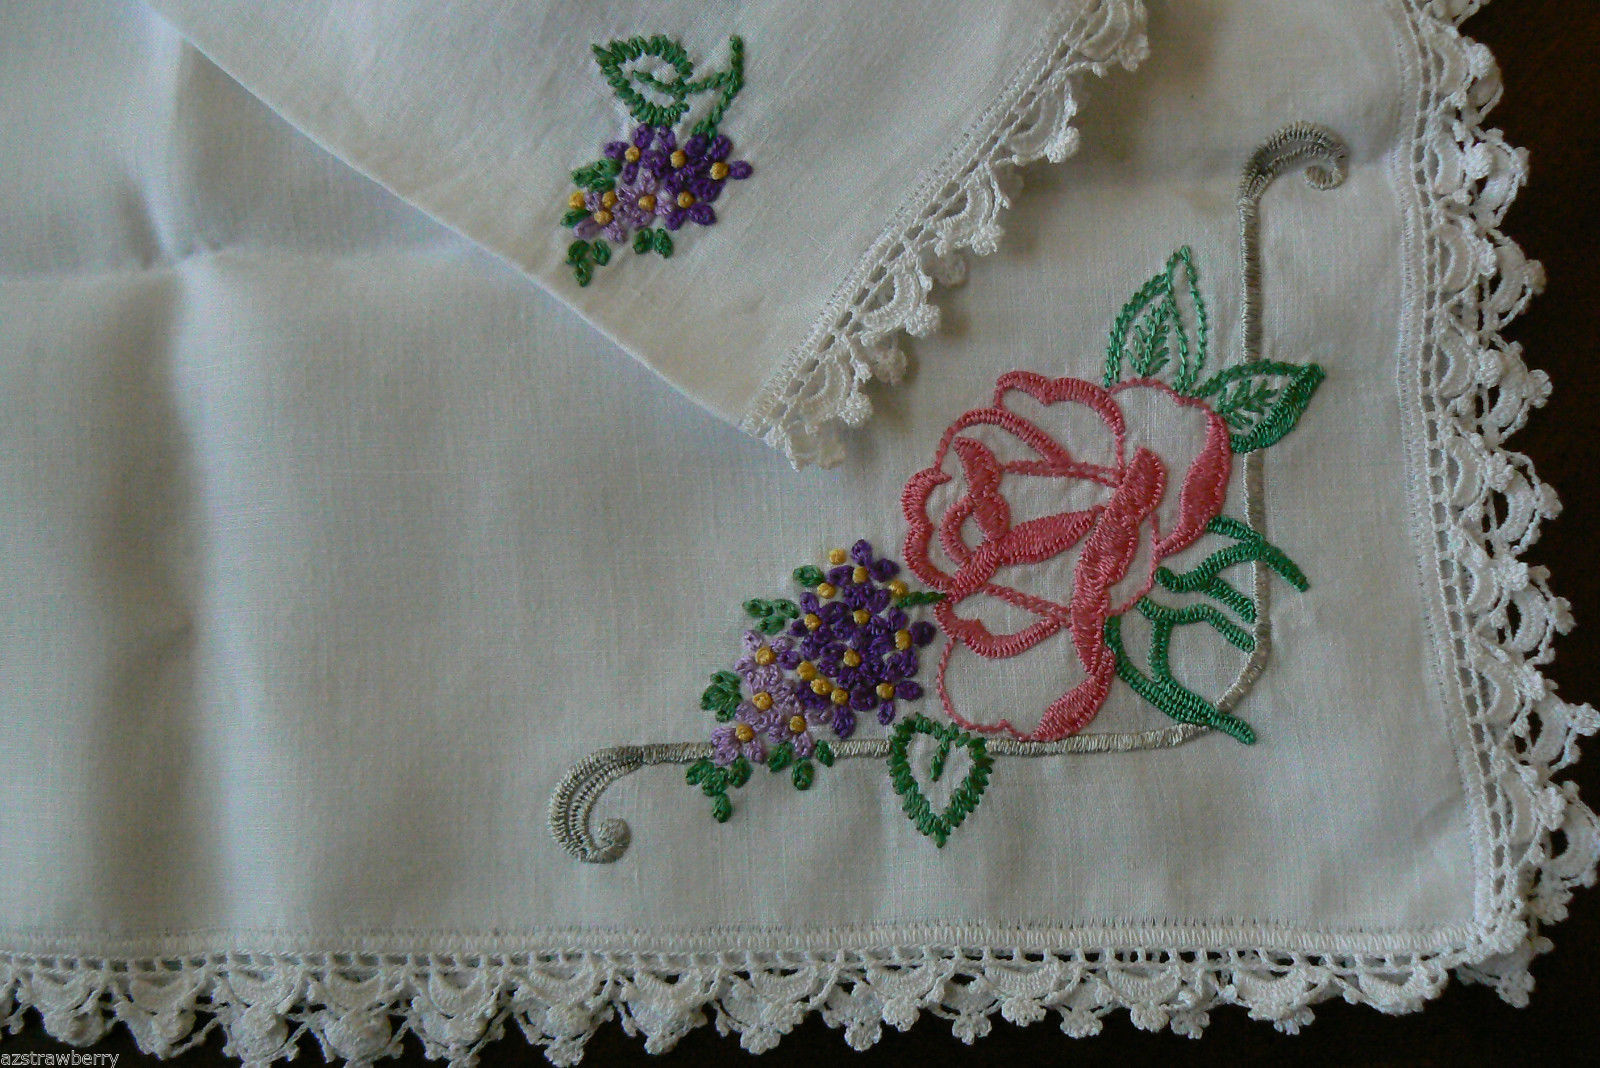 VTG White Cotton linen Table runner Floral  Embroidery Cutout Floral 19" x 43" - $45.00